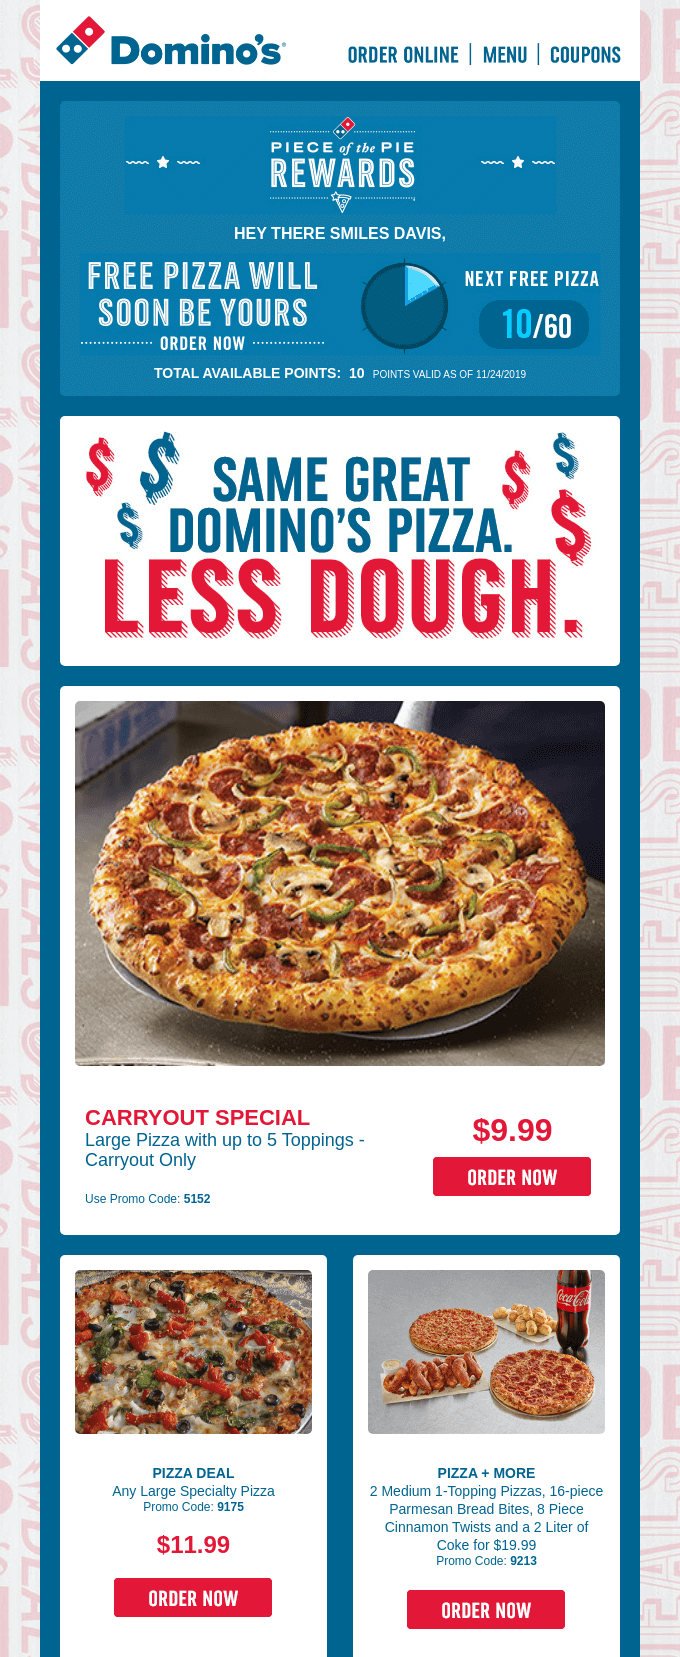 dominos_upselling example